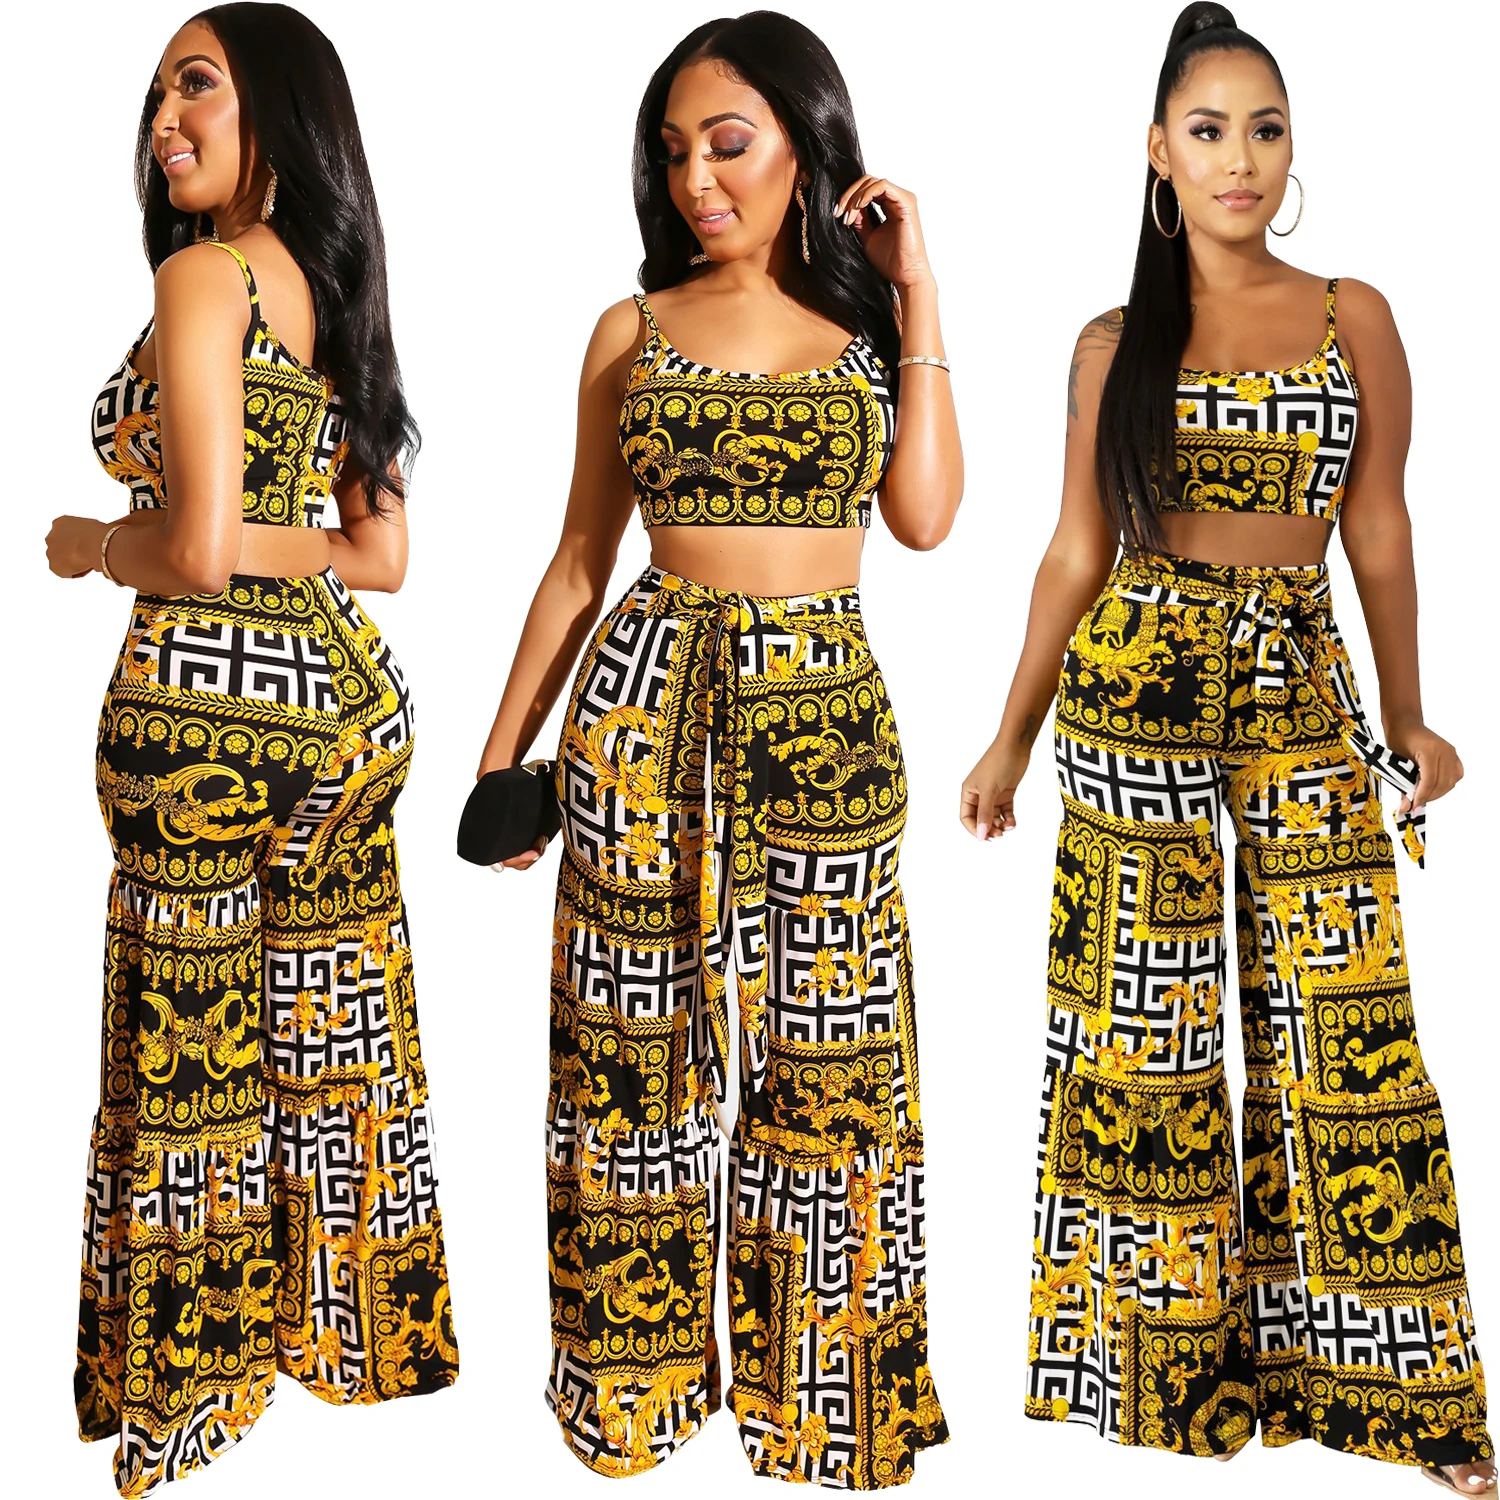 

90702-MX65 crop tops and long pants women two piece set clothing